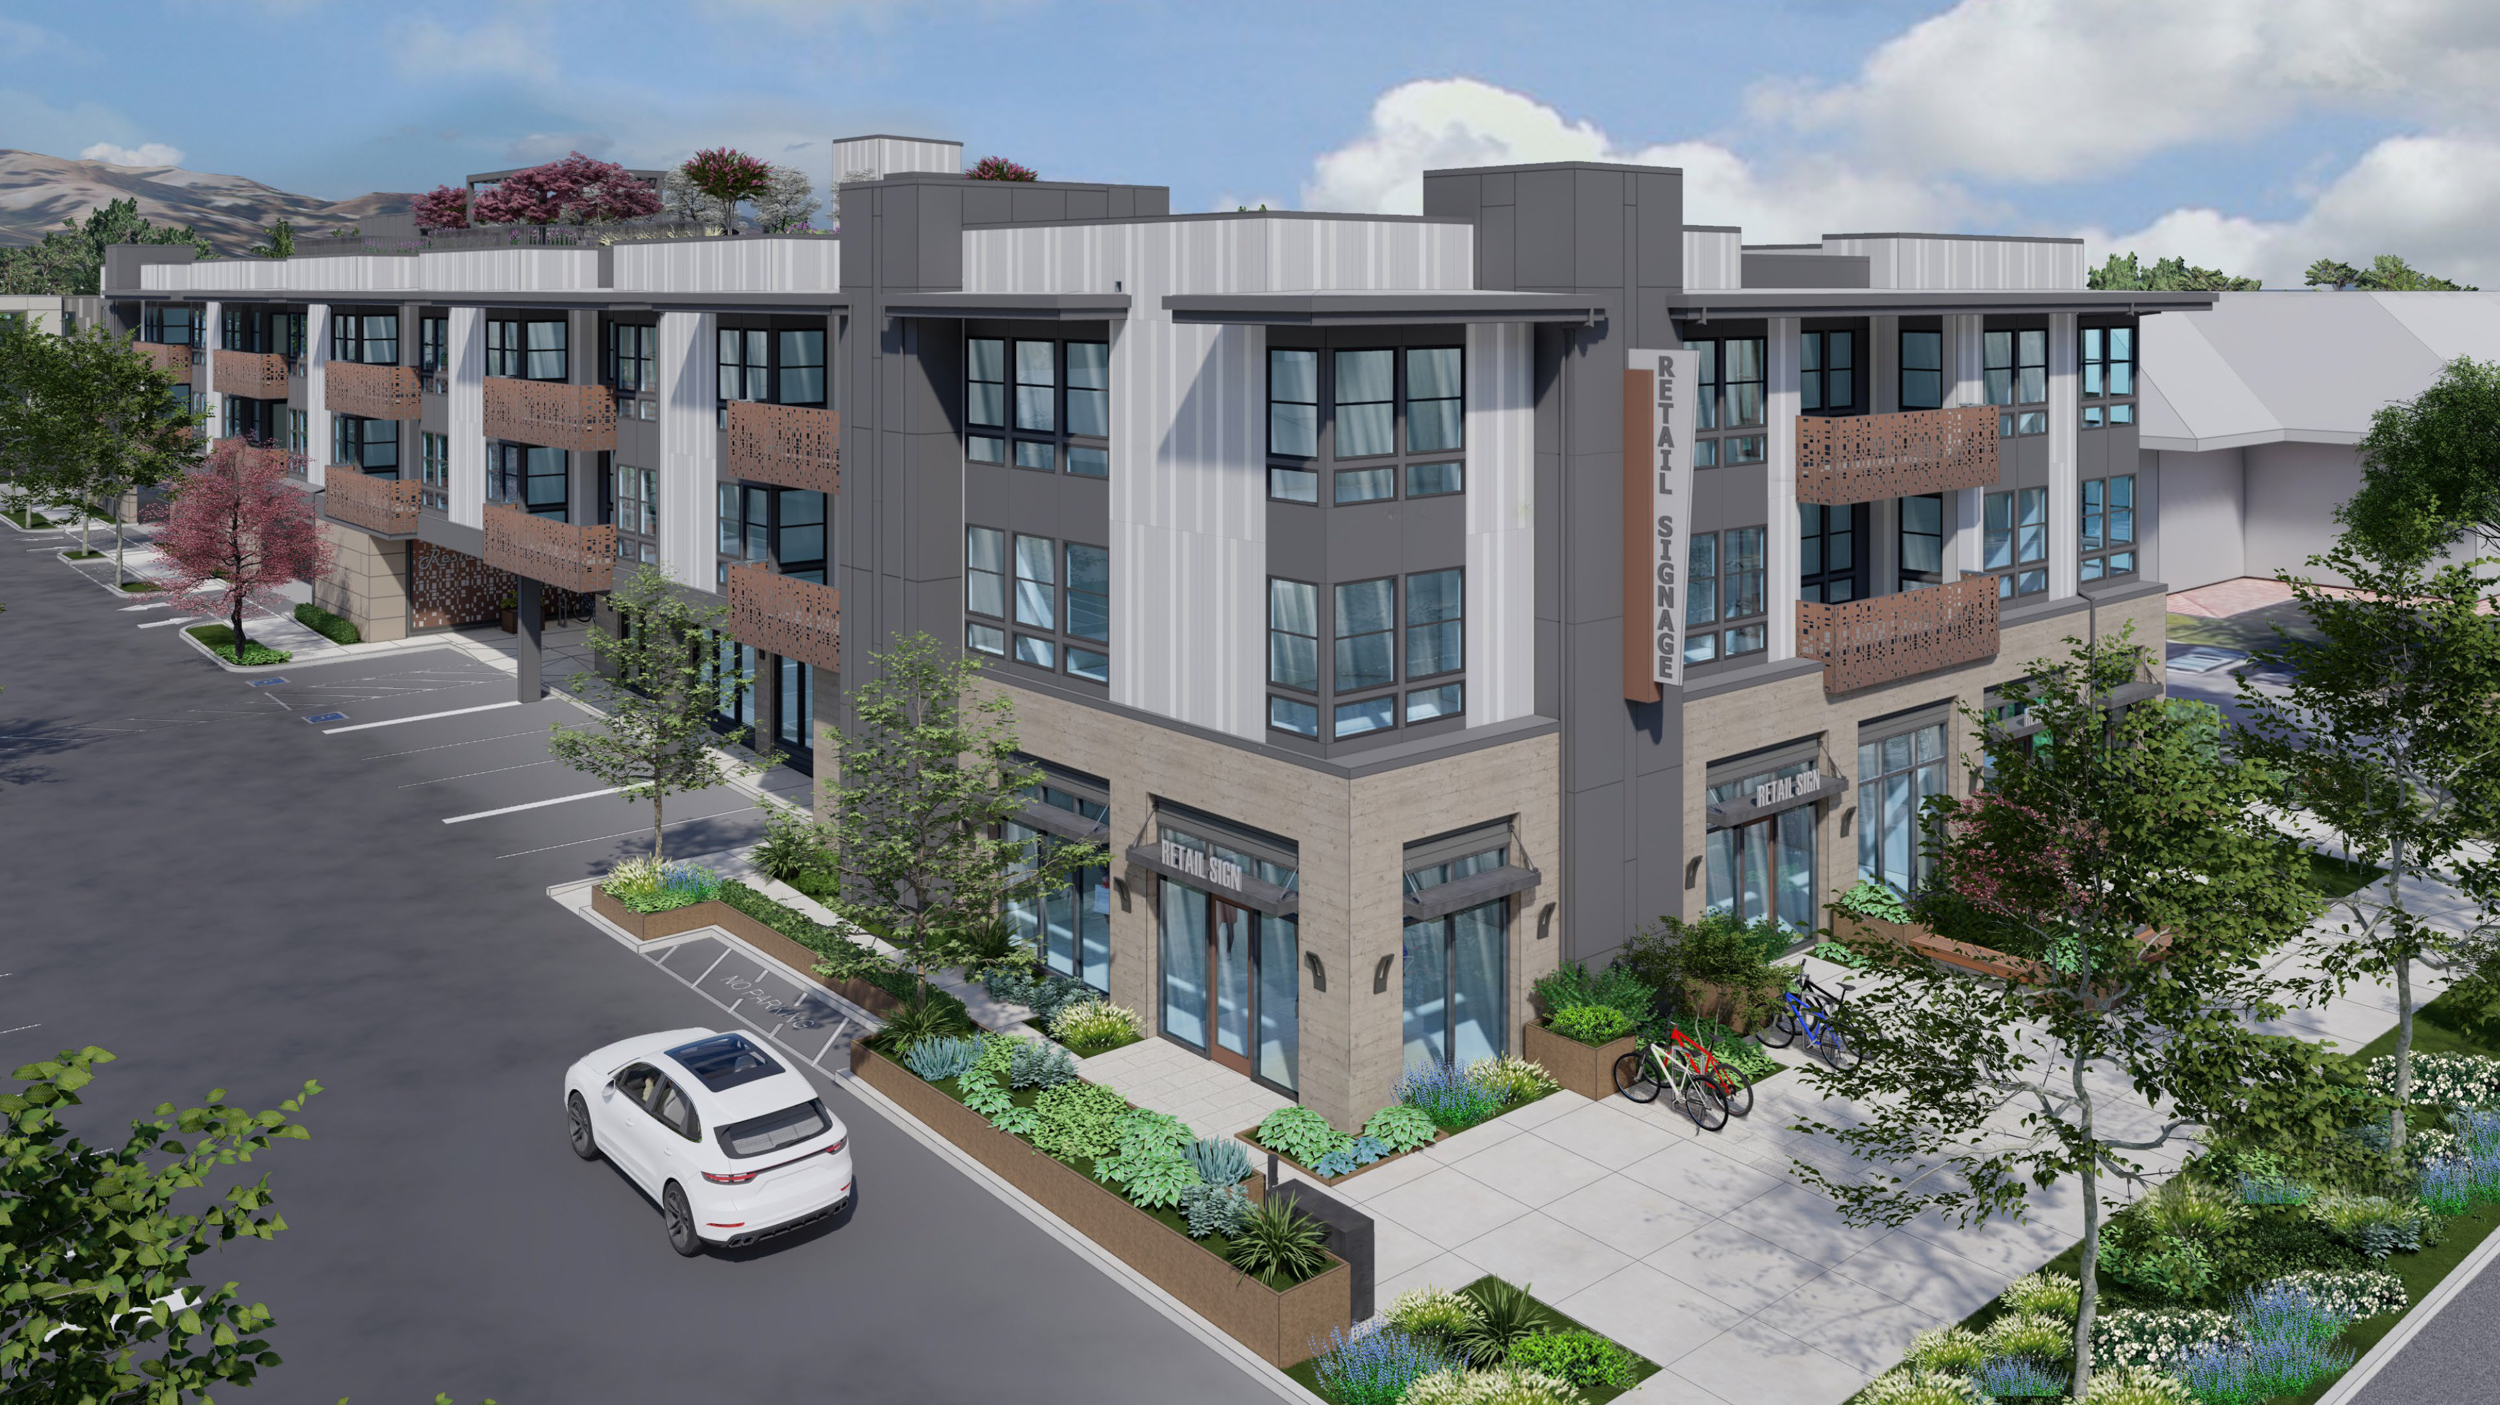 1655 South De Anza Boulevard apartment component, rendering by Dahlin Group